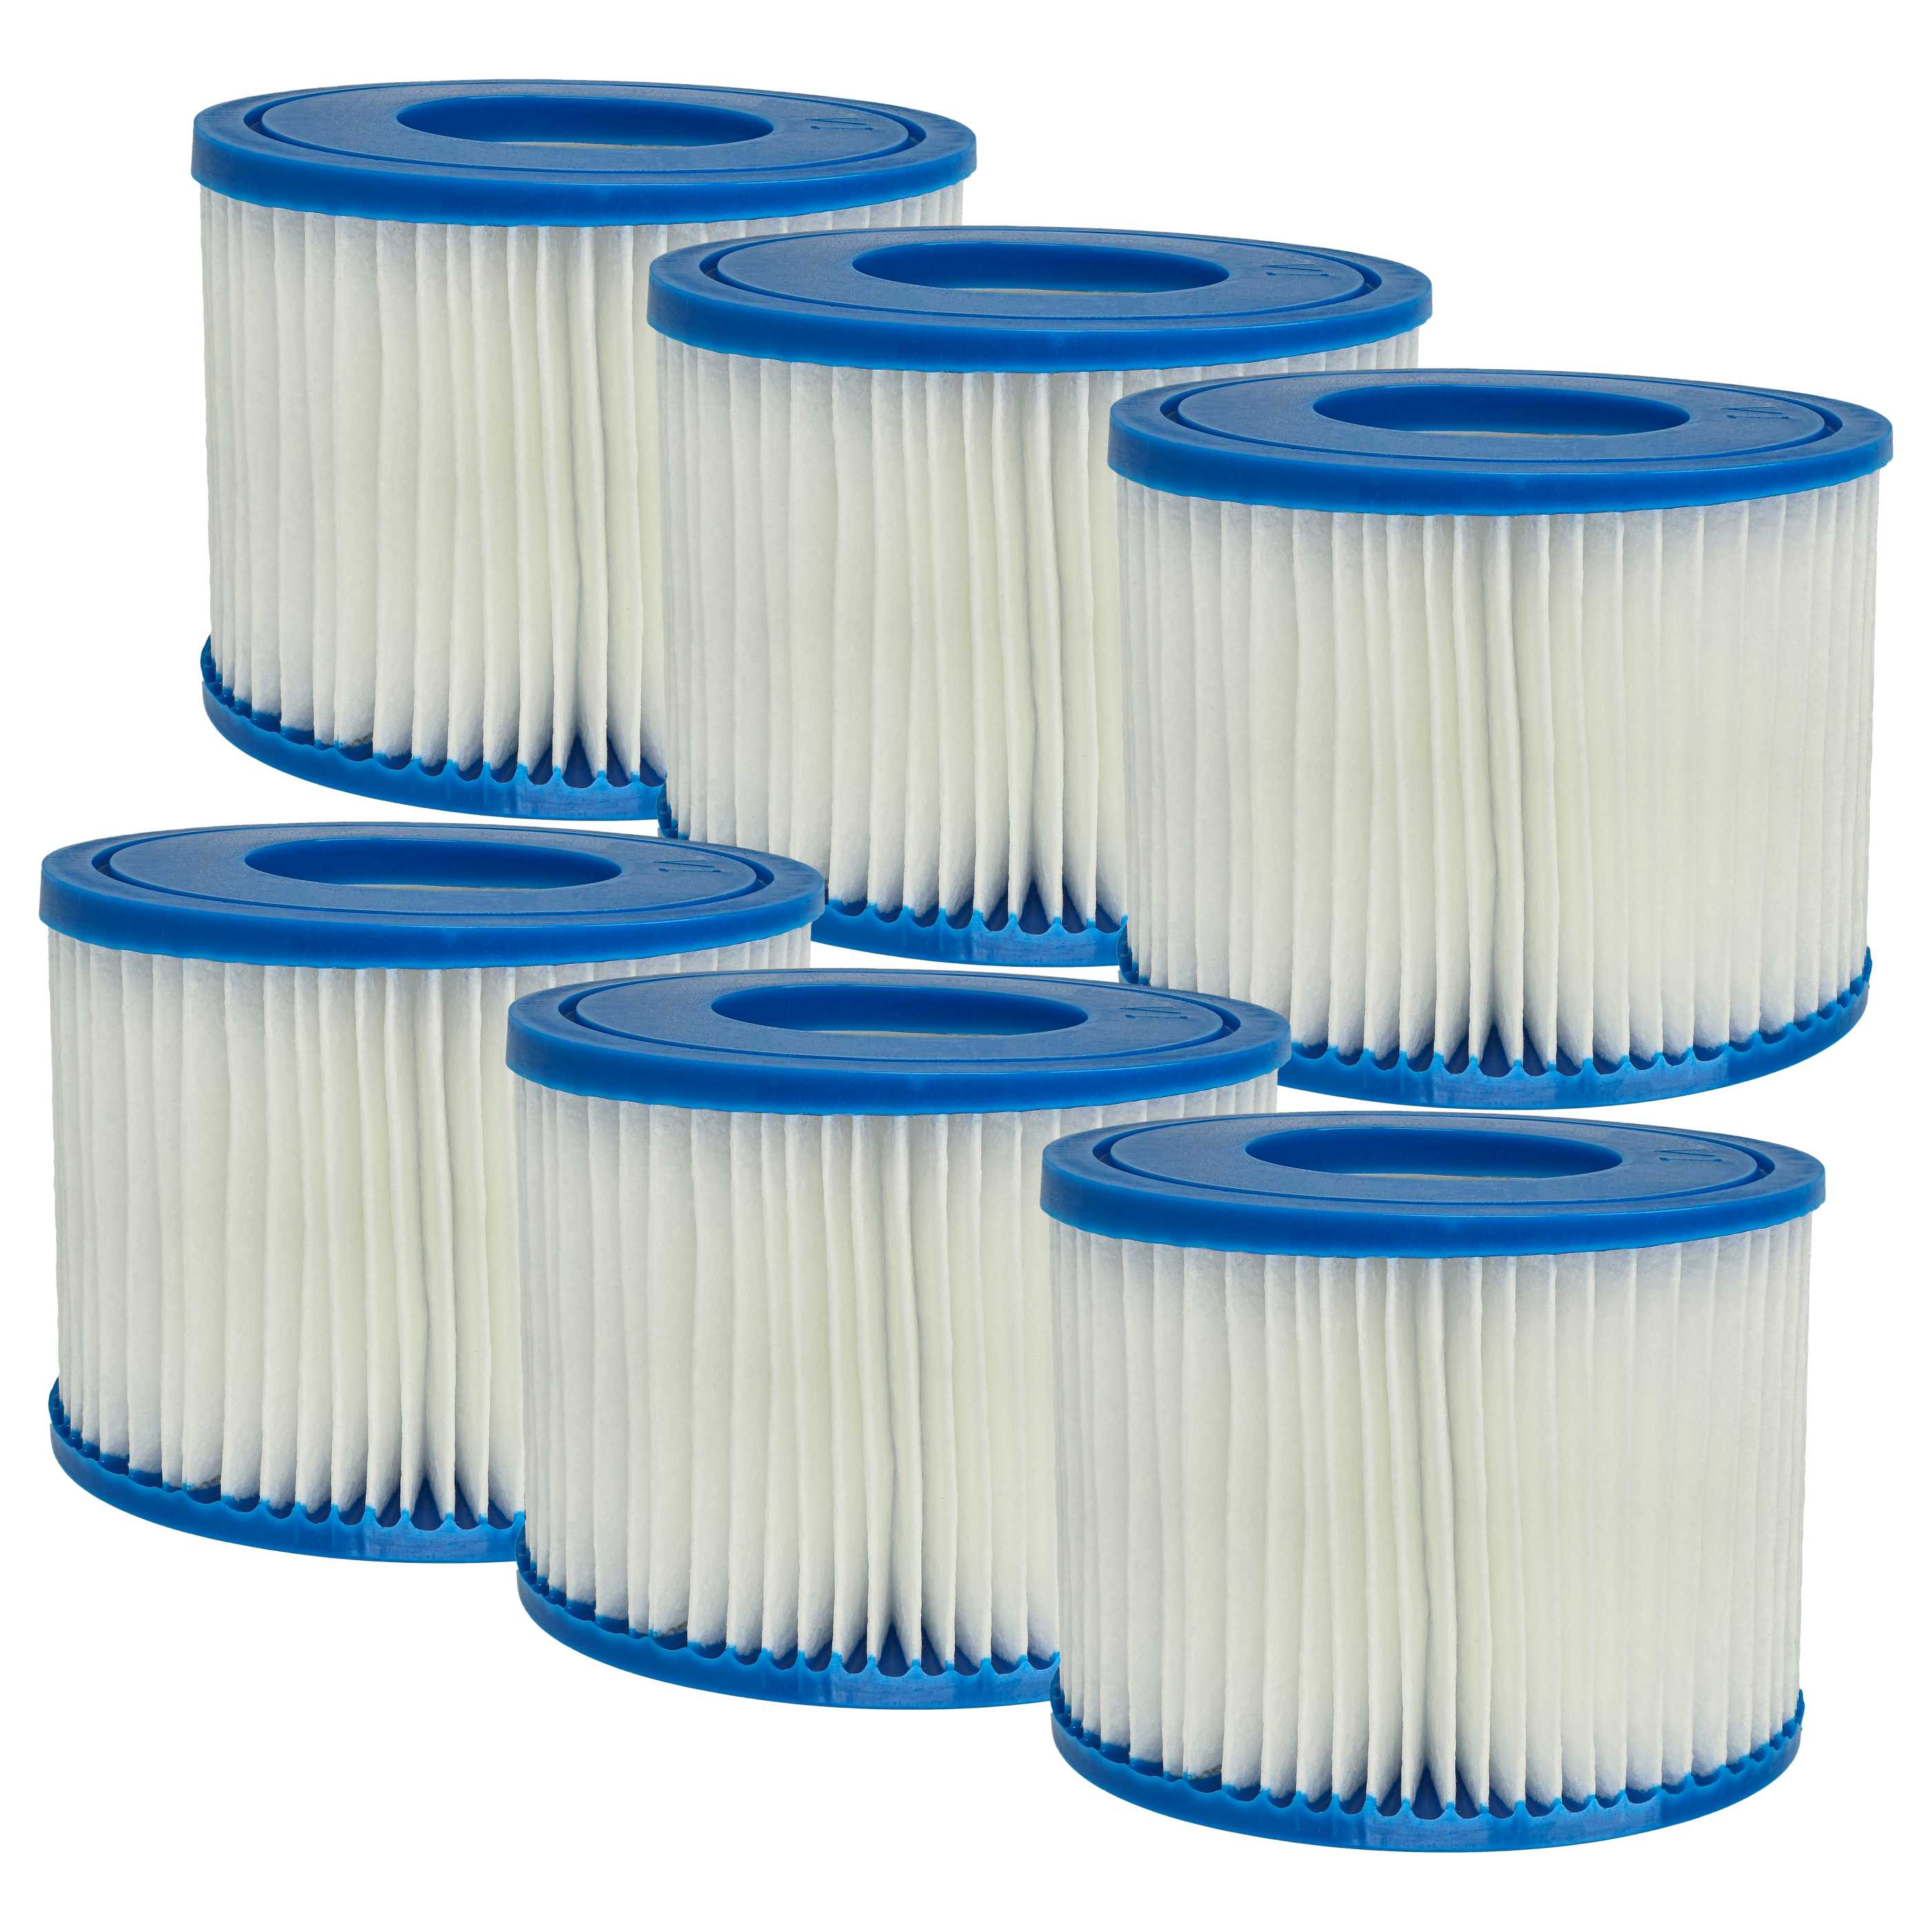 6x Pool Filter Type VI as Replacement for Bestway Typ VI, FD2134 - Filter Cartridge